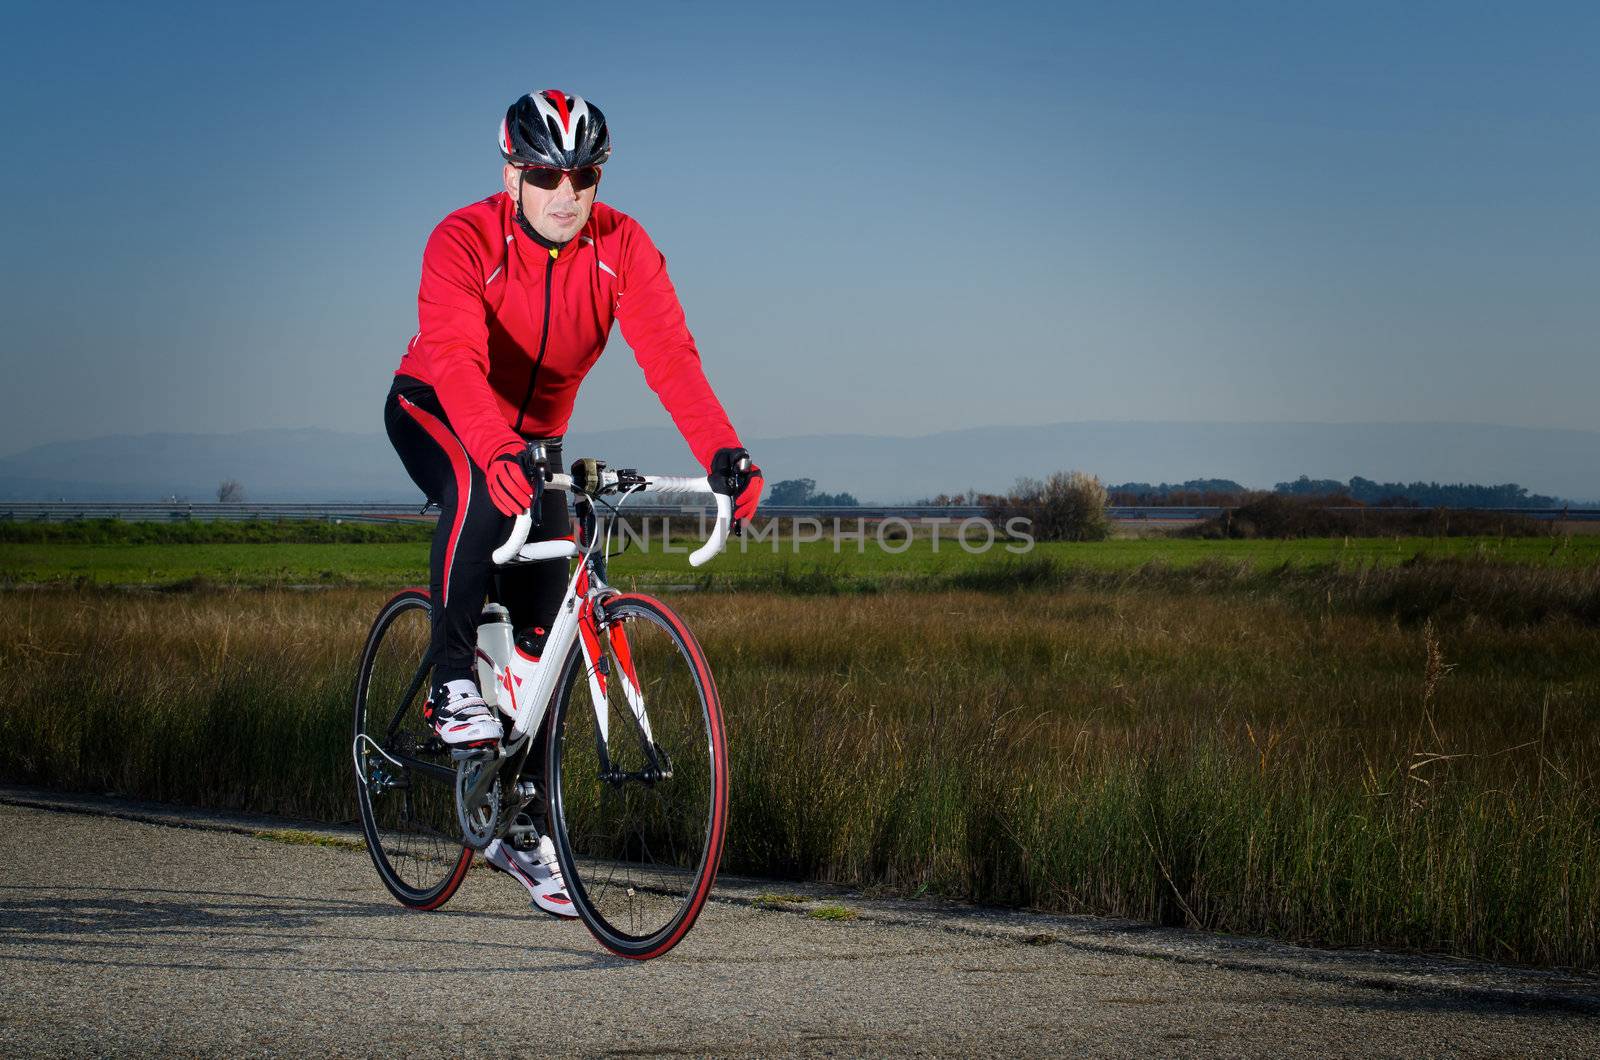 Man on road bike on open country road background.